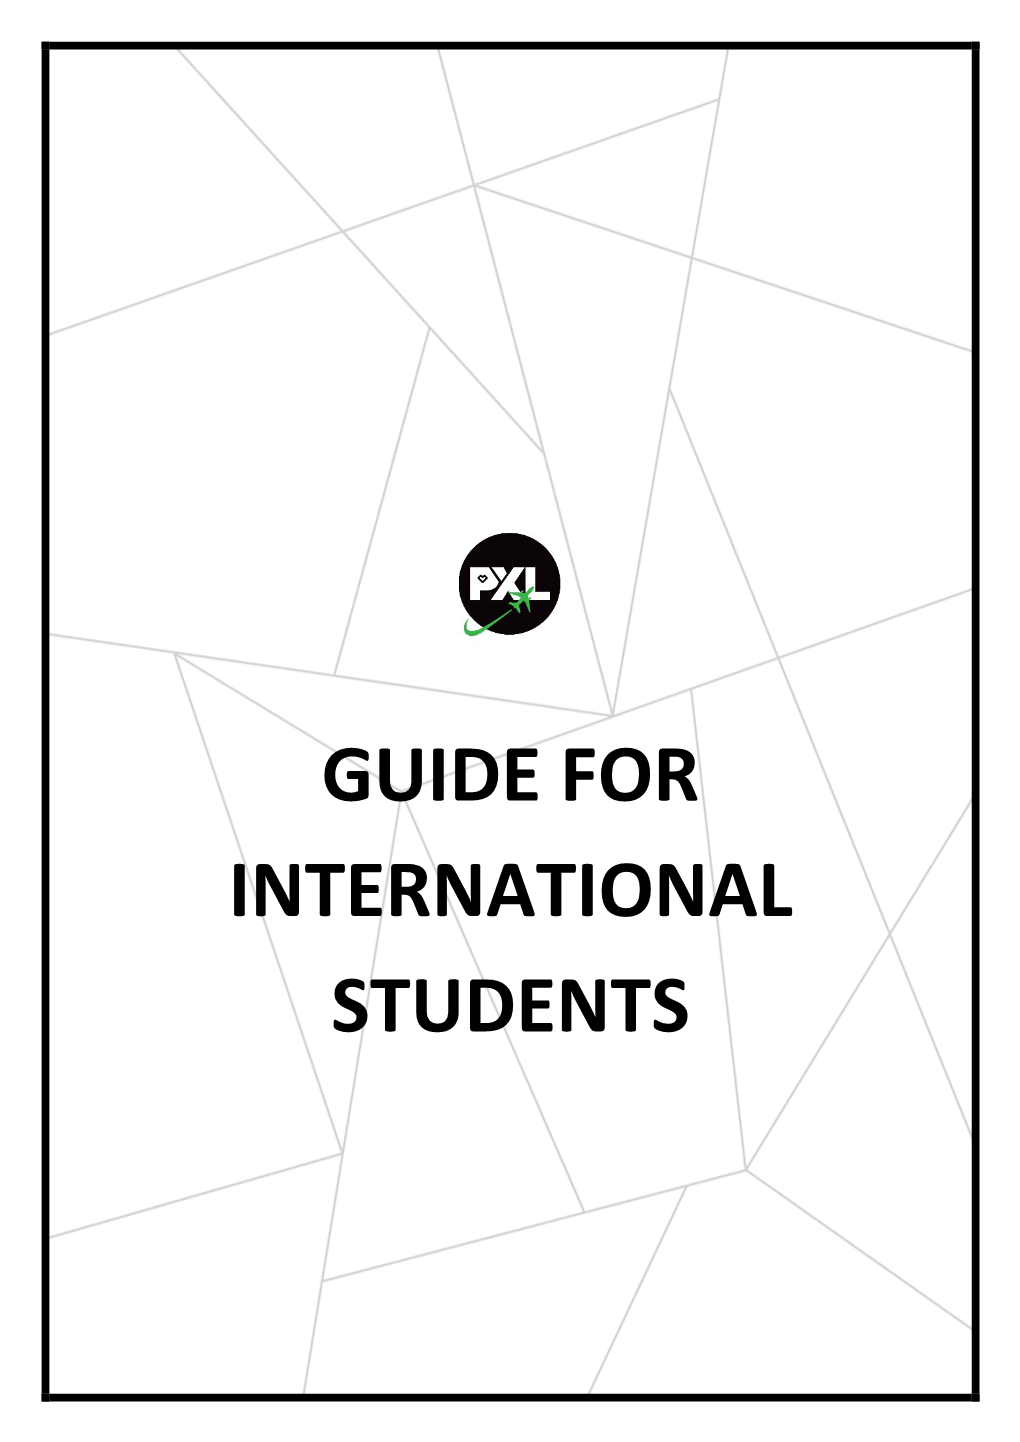 GUIDE for INTERNATIONAL STUDENTS Welcome to PXL University of Applied Sciences and Arts